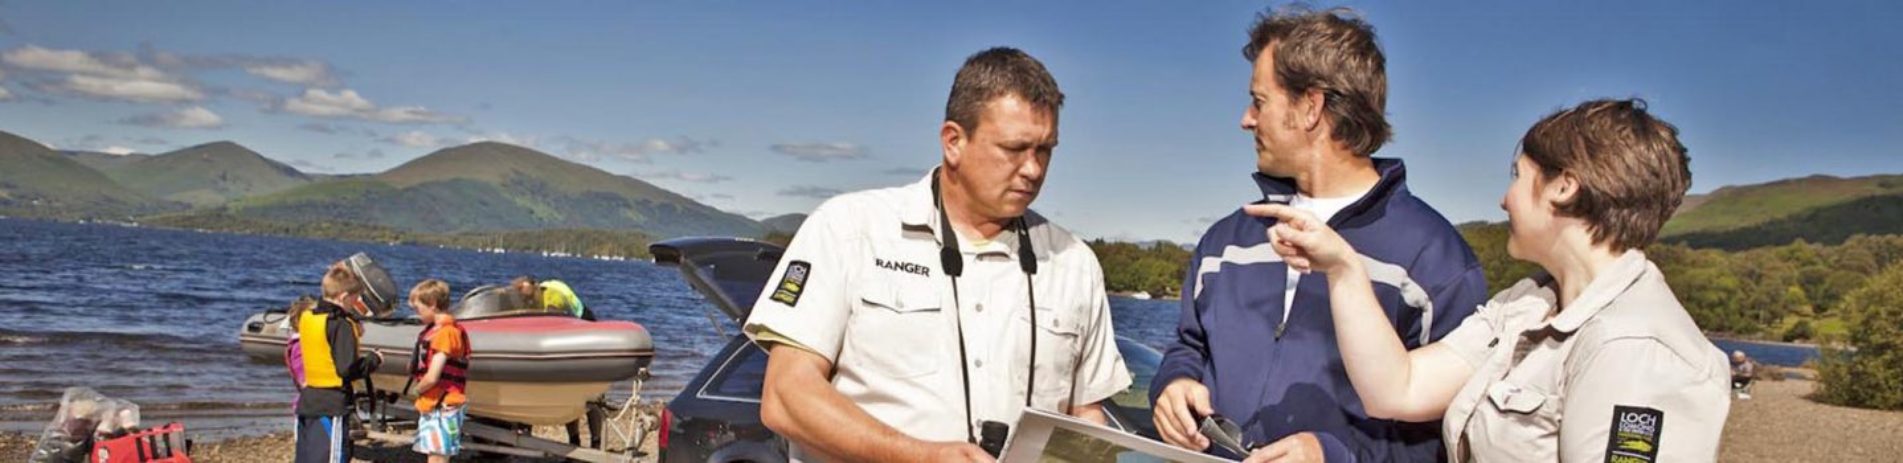 two-rangers-talking-to-member-of-the-public-and-advising-him-using-map-at-milarrochy-bay-on-summer-day-boat-launching-behind